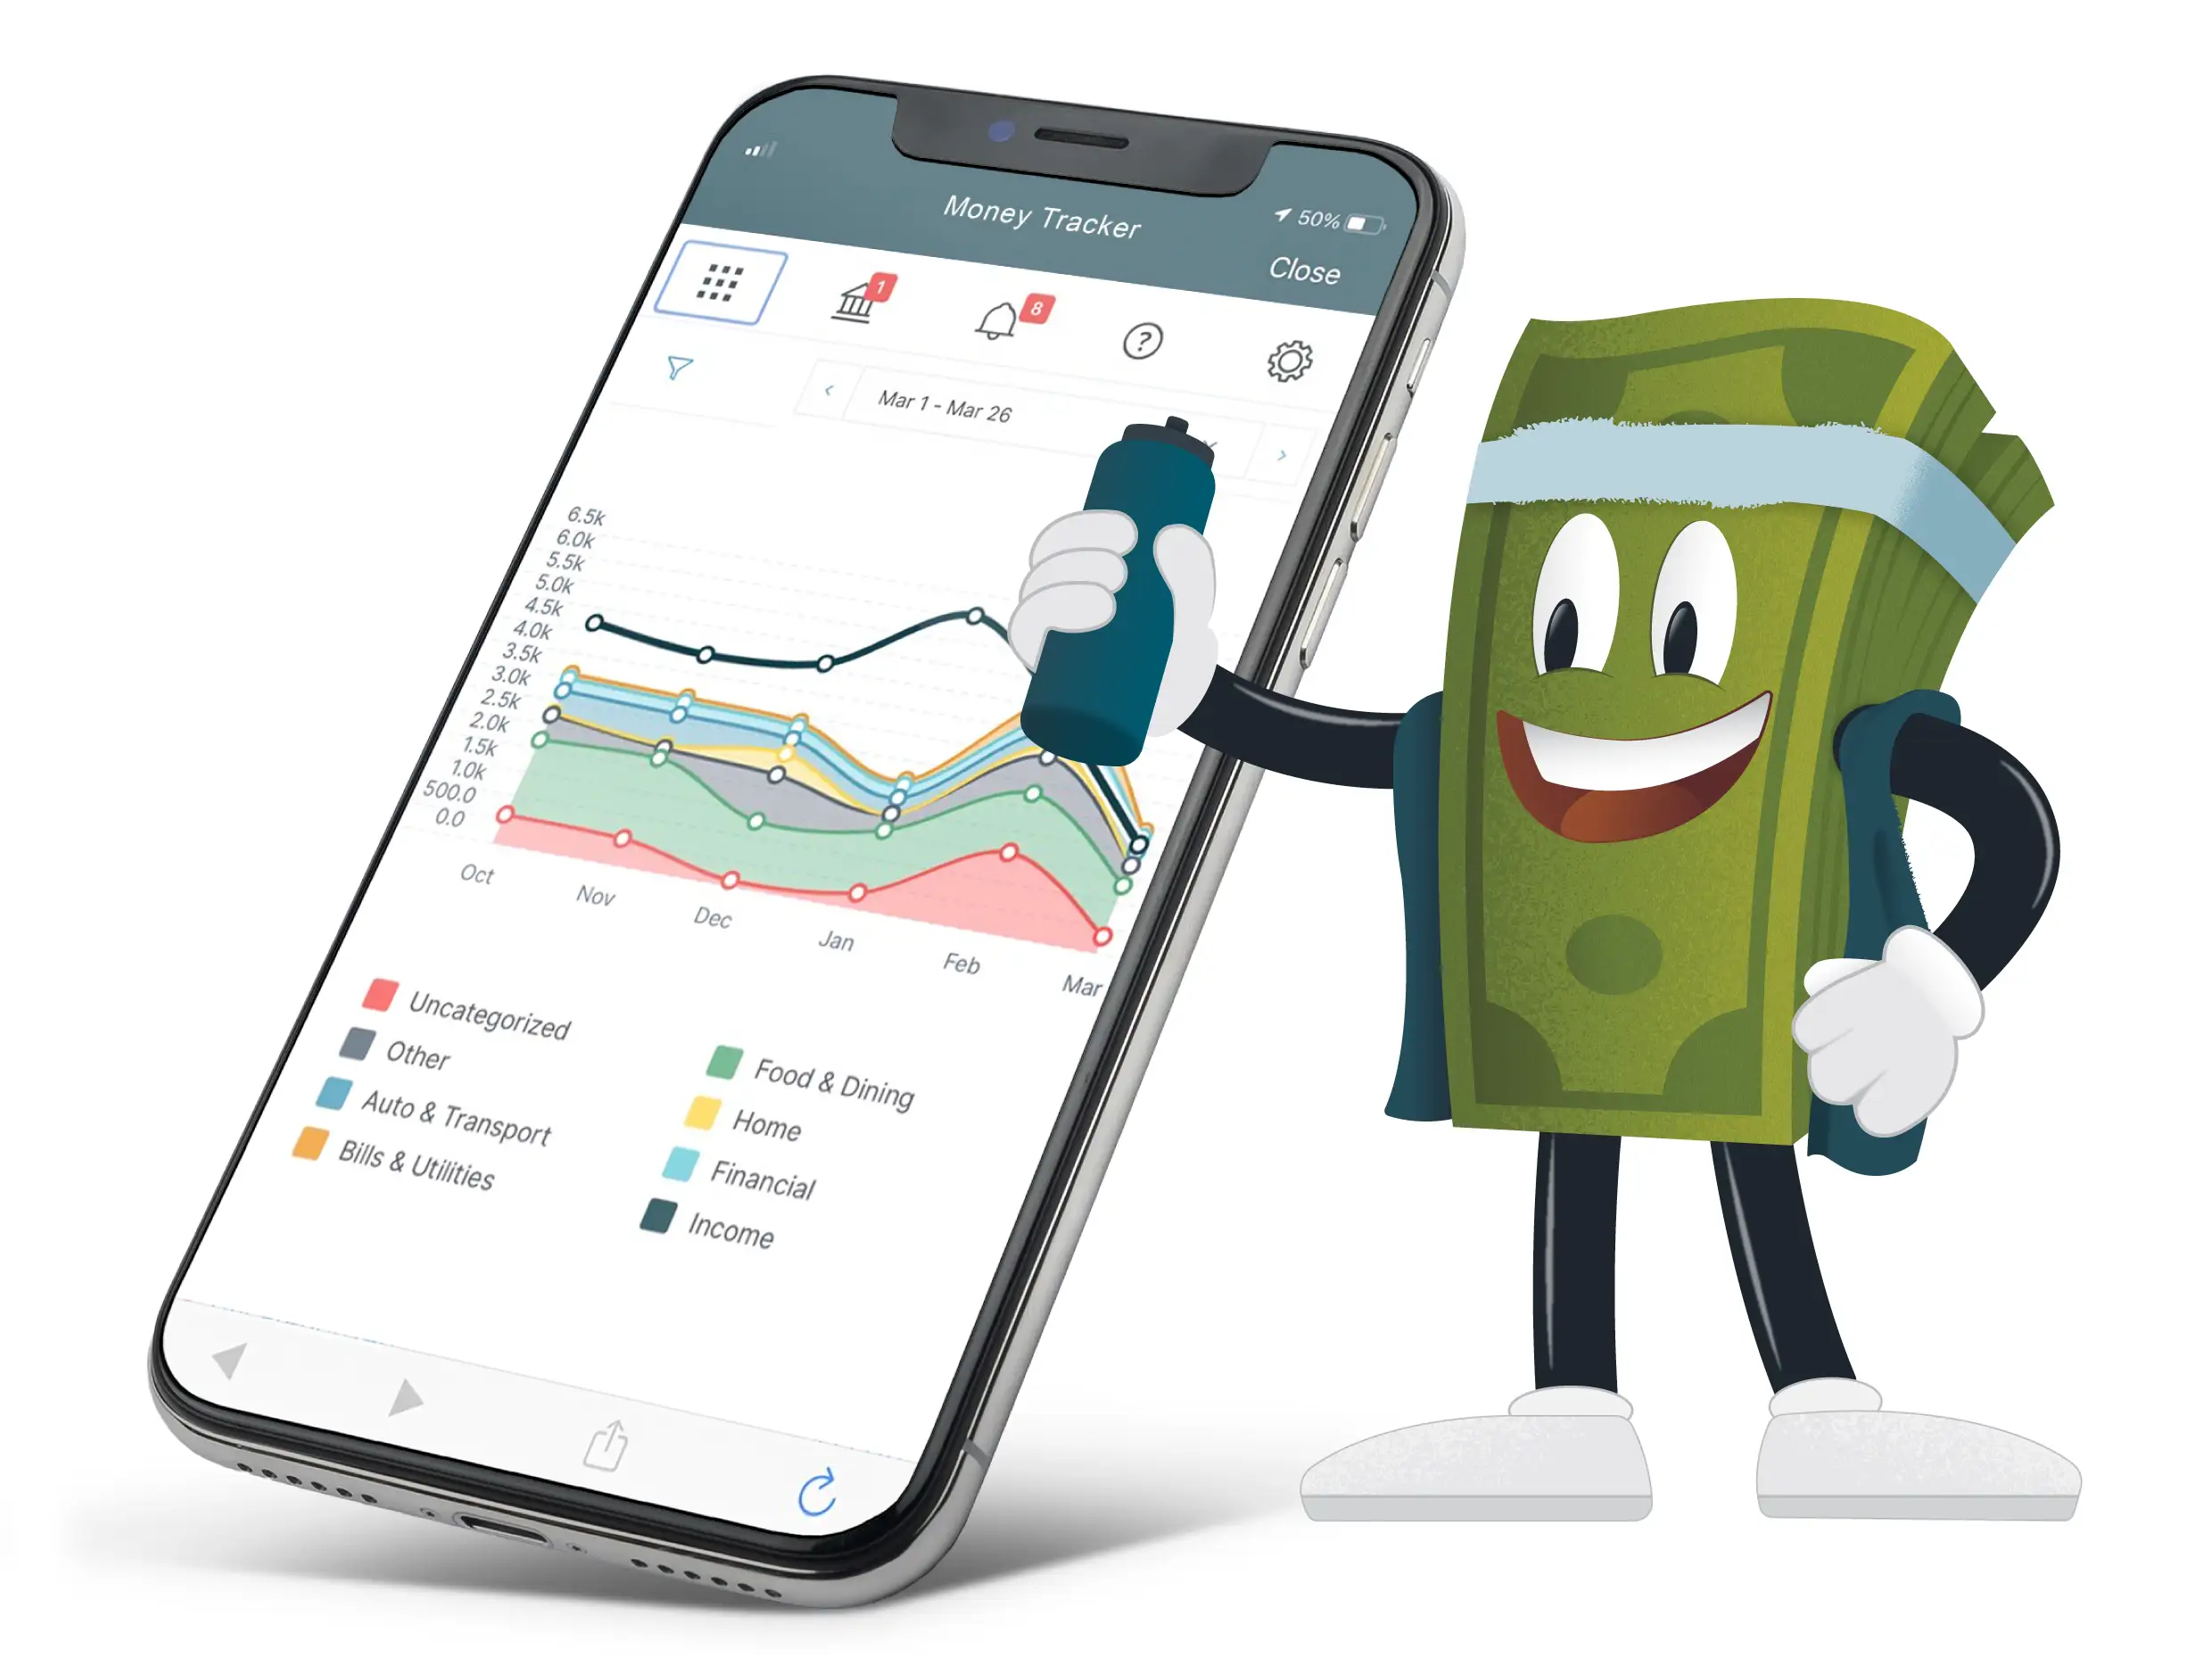 Image of a money character after his workout standing in front of a phone mockup with an image of the Money Tracker app